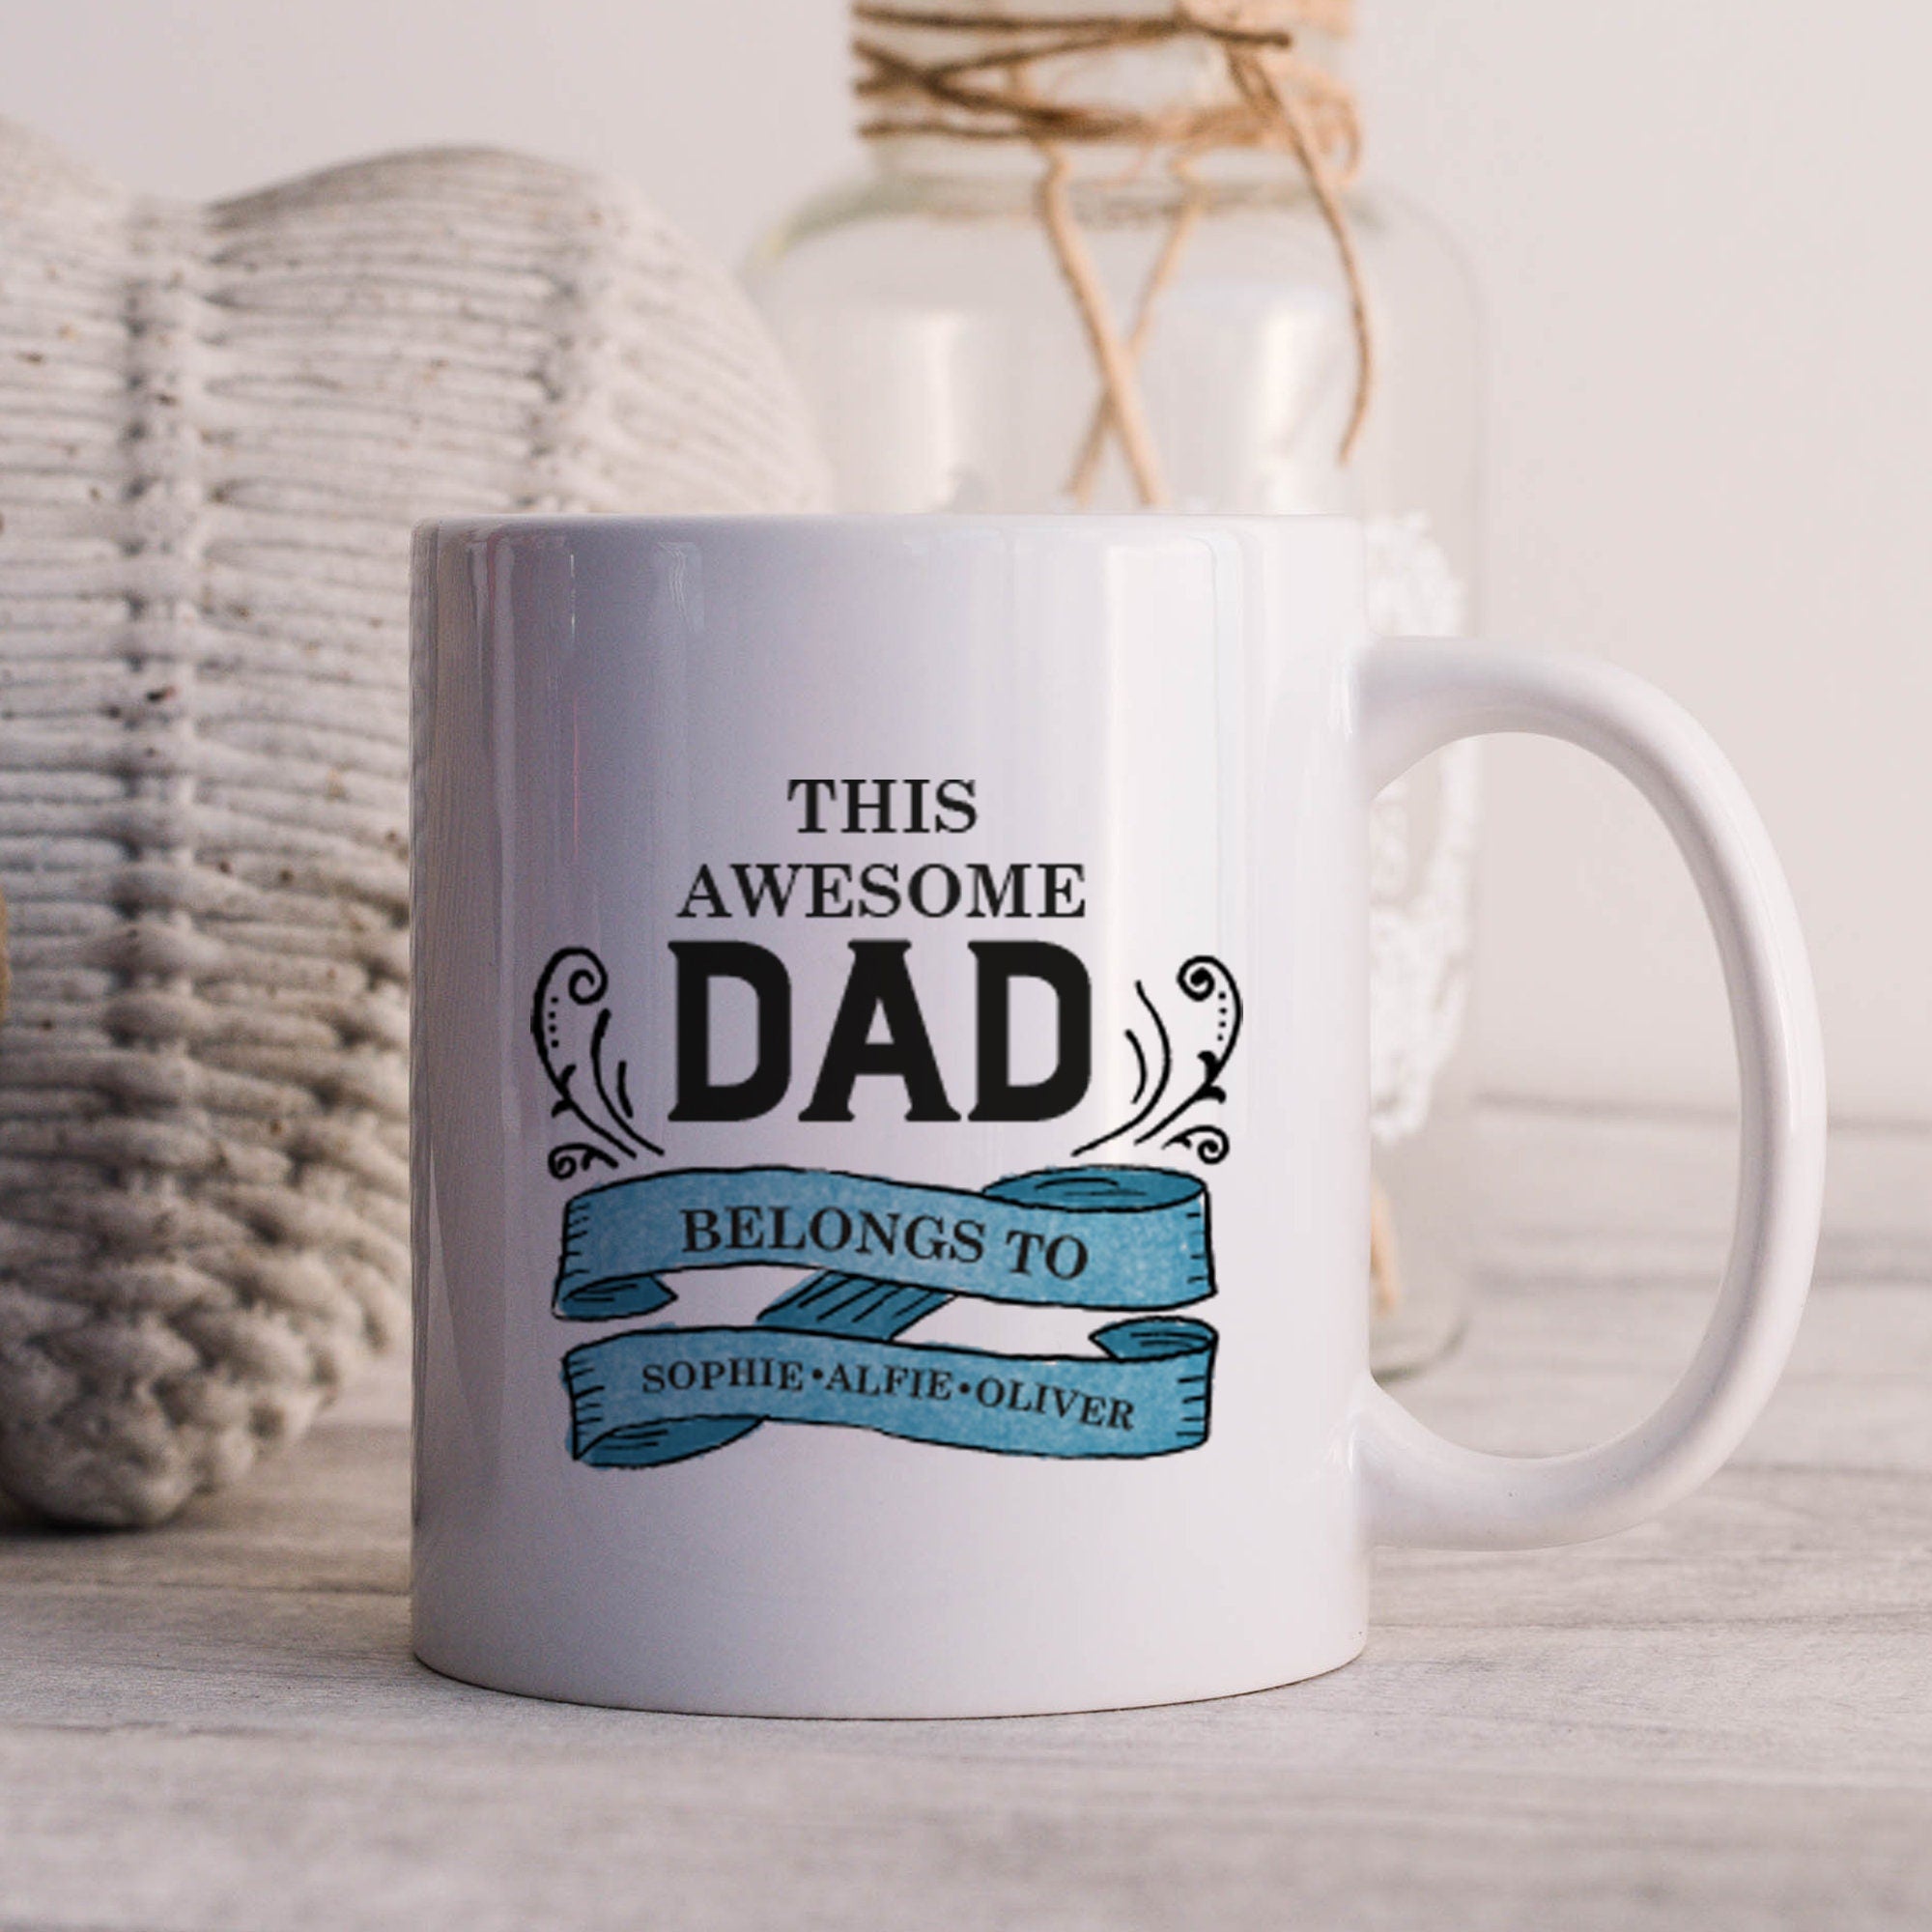 This awesome dad belongs to mug, Father's Day gift, Personalised First Father's Day present